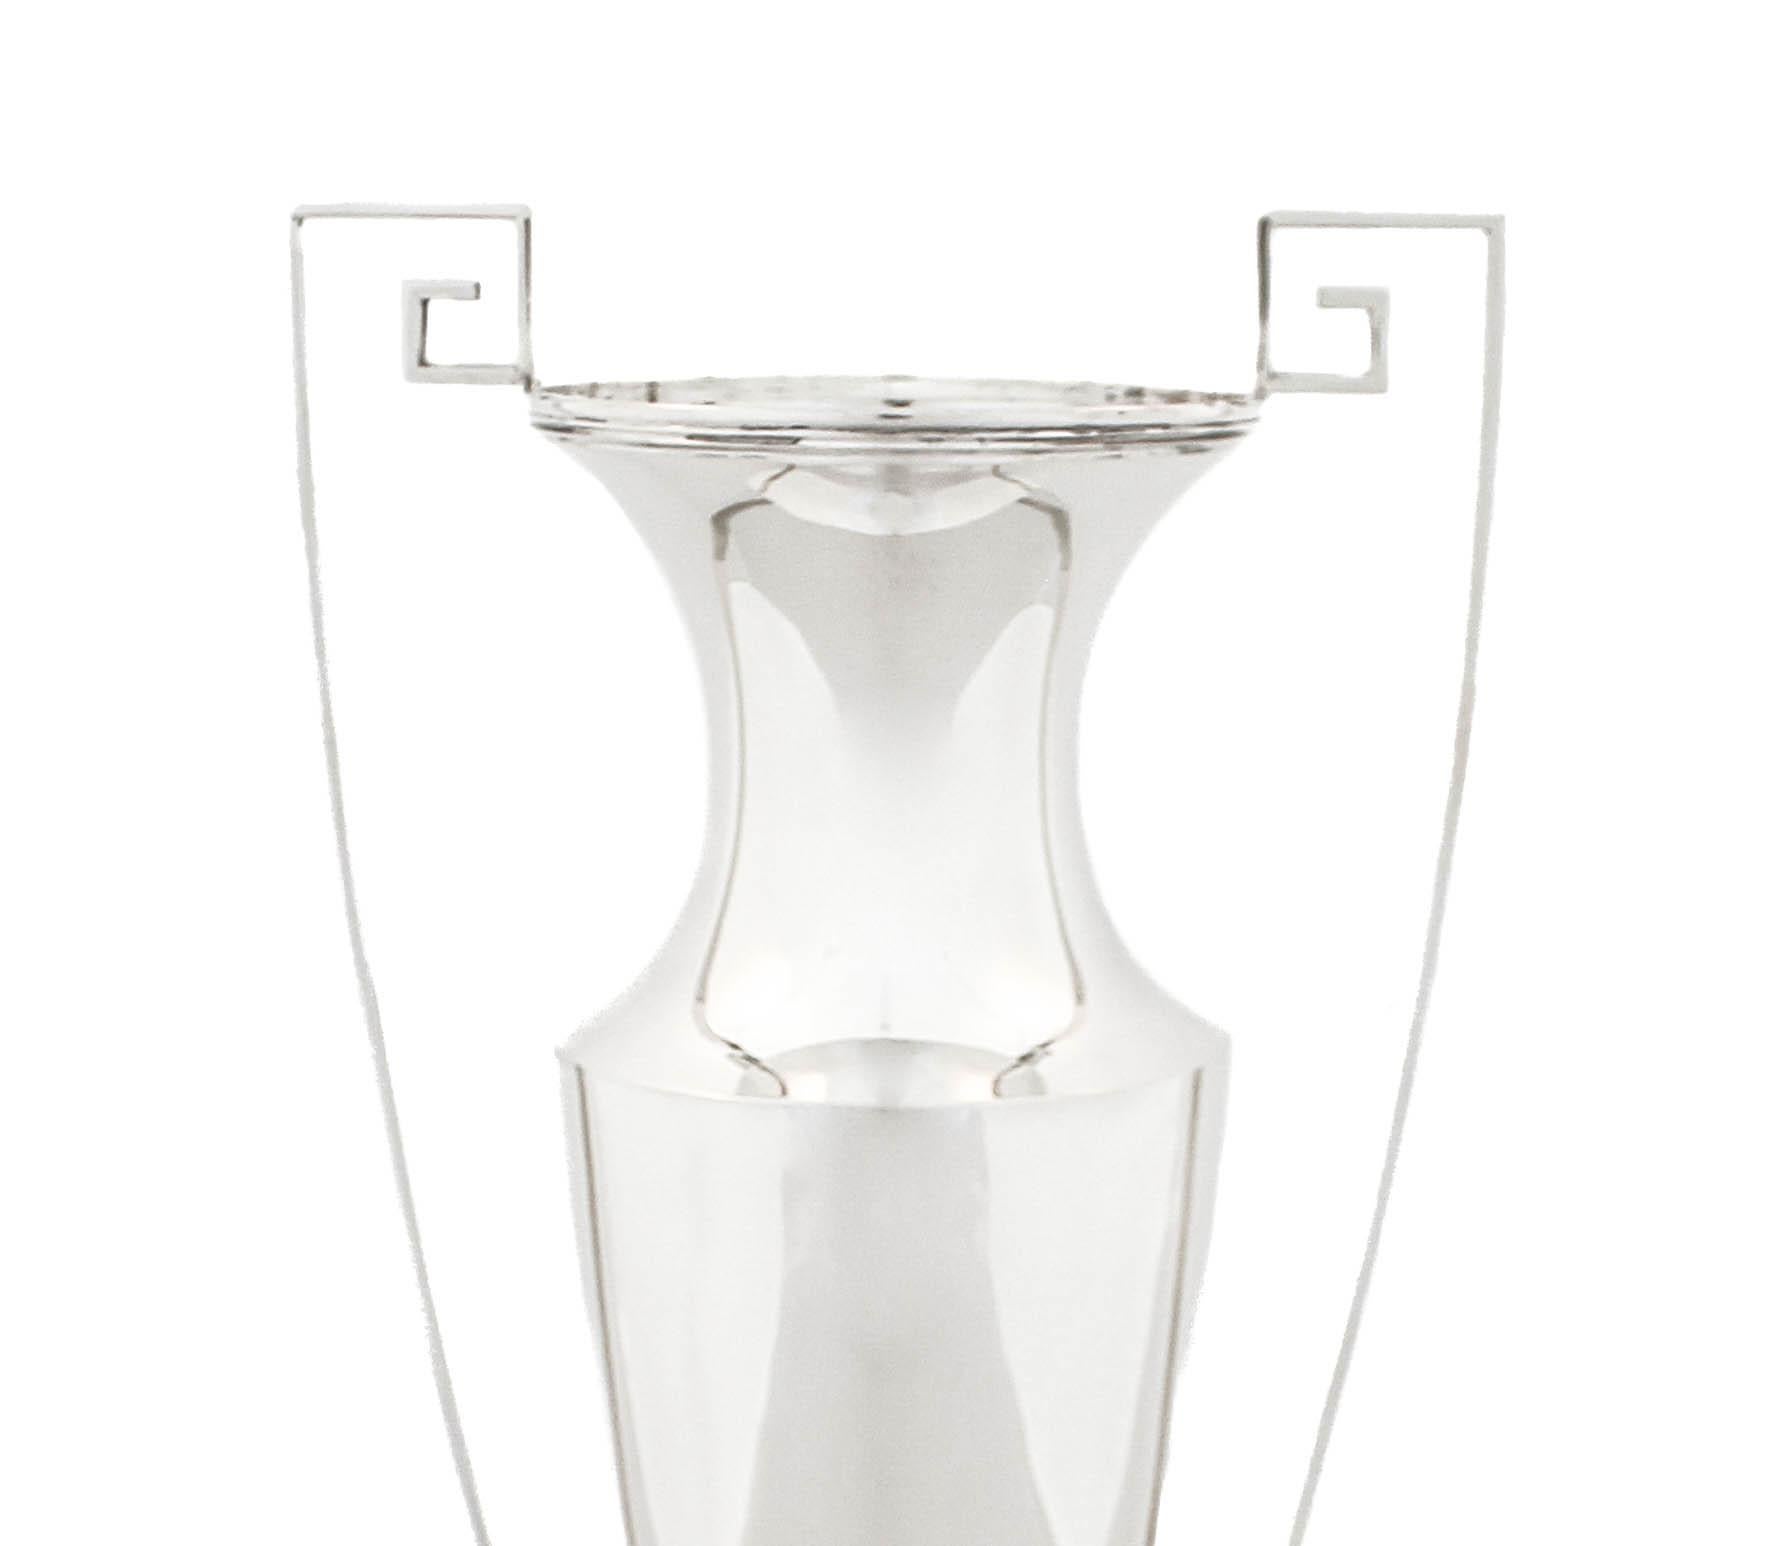 Being offered is a sterling silver vase by Marcus & Company in the “Etruscan” pattern.  It has a tapered shape with with a curved neck.  On each side there are handles in the Etruscan key shape going from the very top until the base.  Uber sleek and